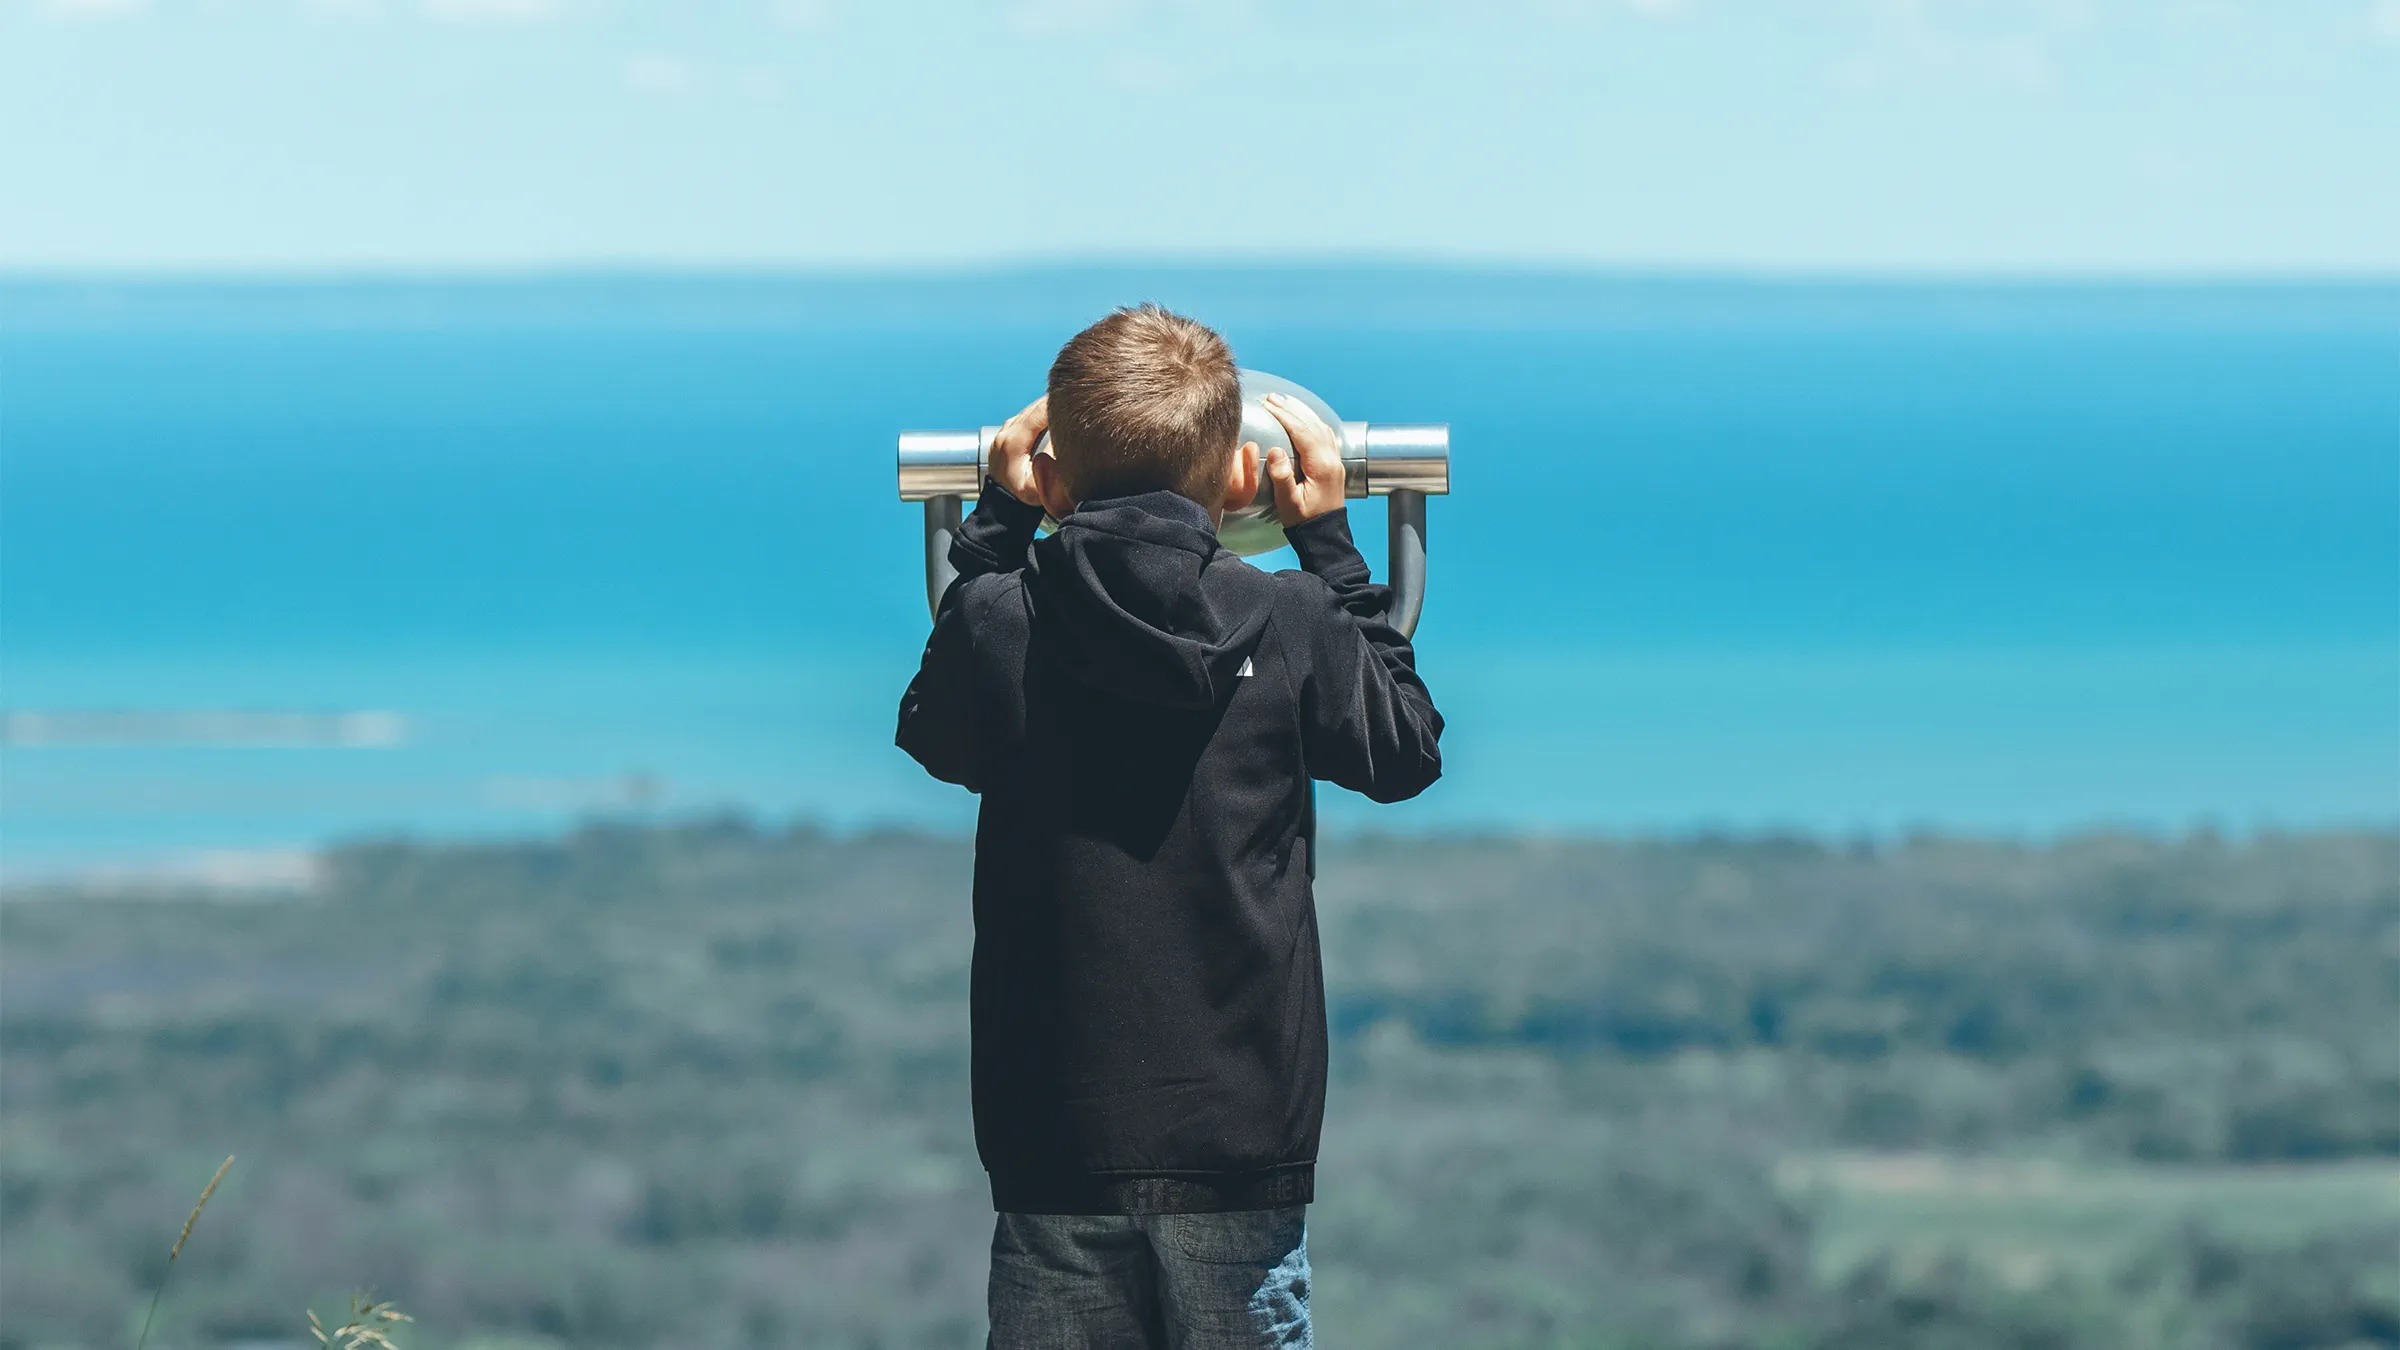 A kid looking at the view with a binoculars at Blue Mountain